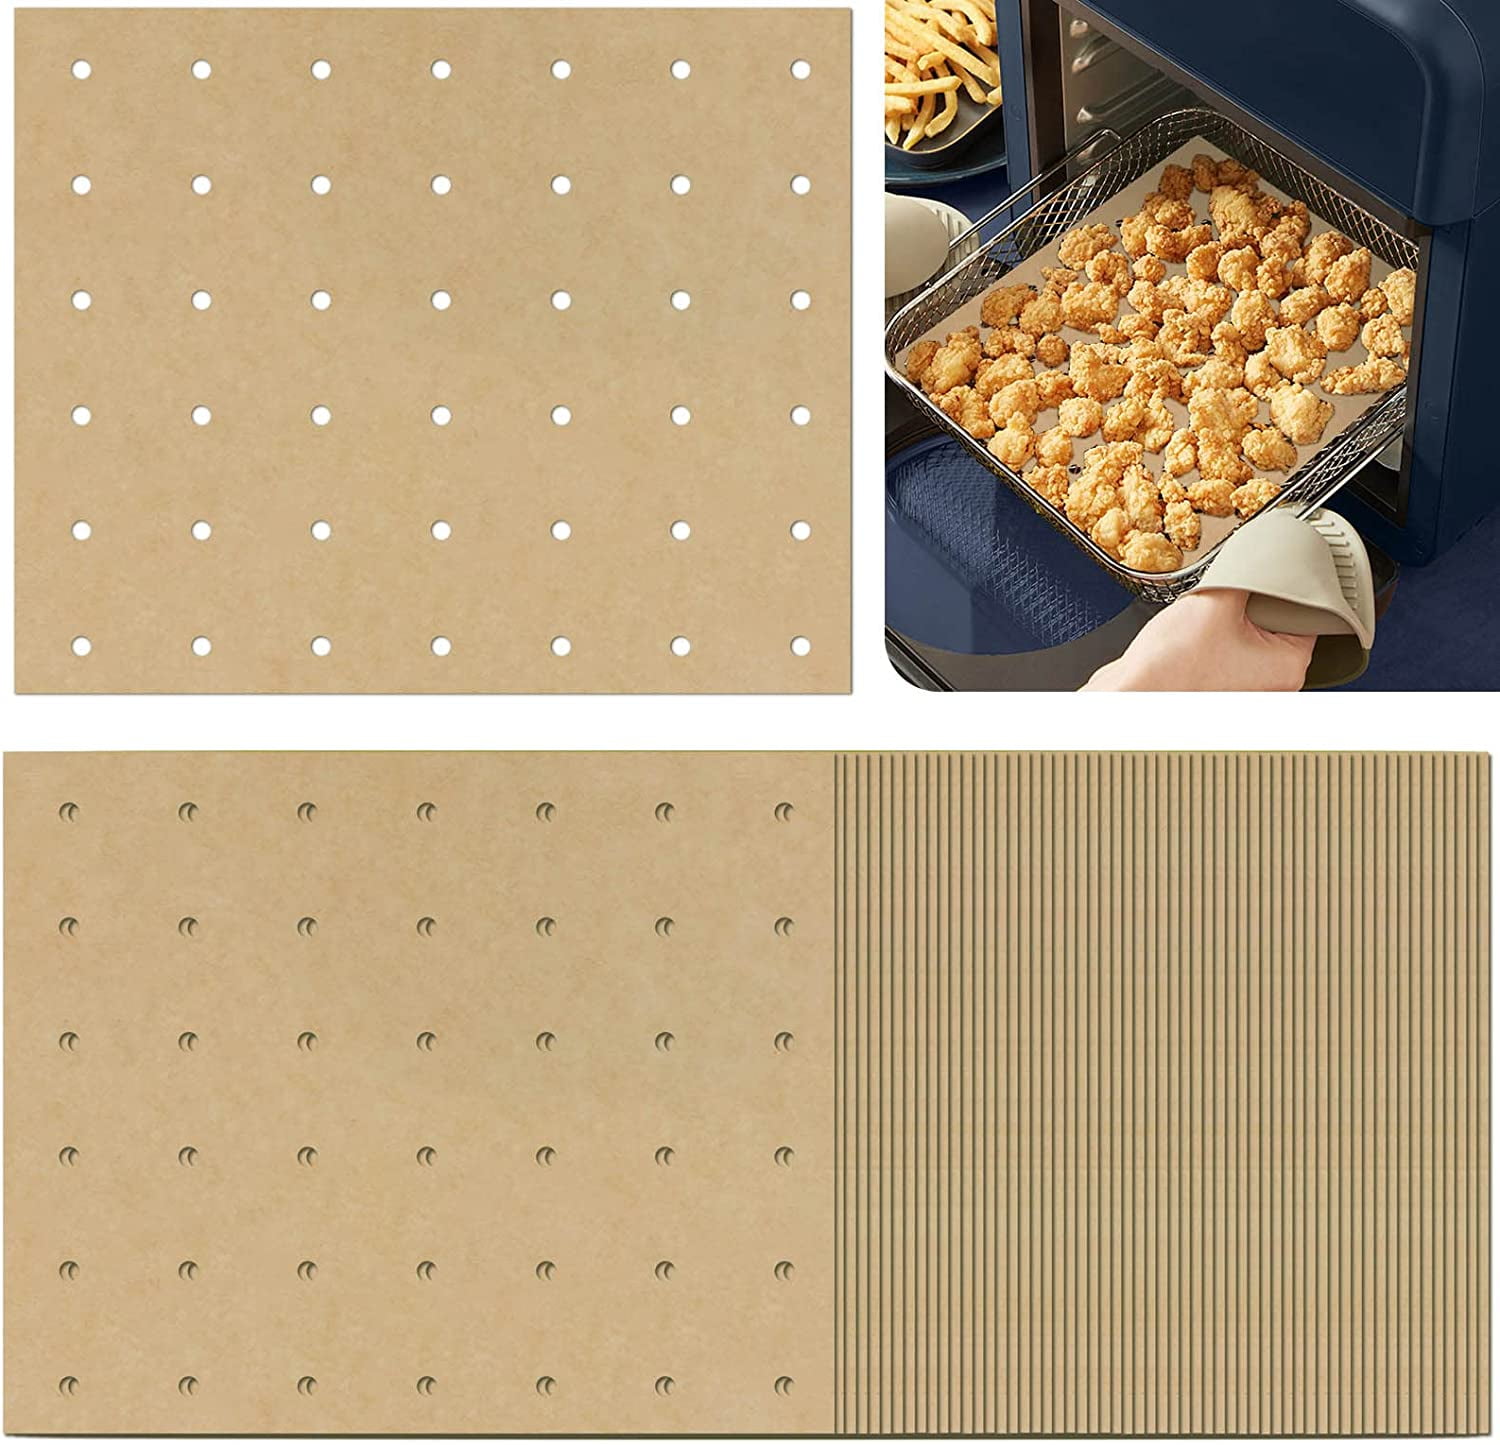 Unbleached Air Fryer Parchment Paper, 100 PCS Perforated Square Air Fryer  Liners for Cuisinart, Breville, Black and Decker Air Fryer, 11 x 9 inch 